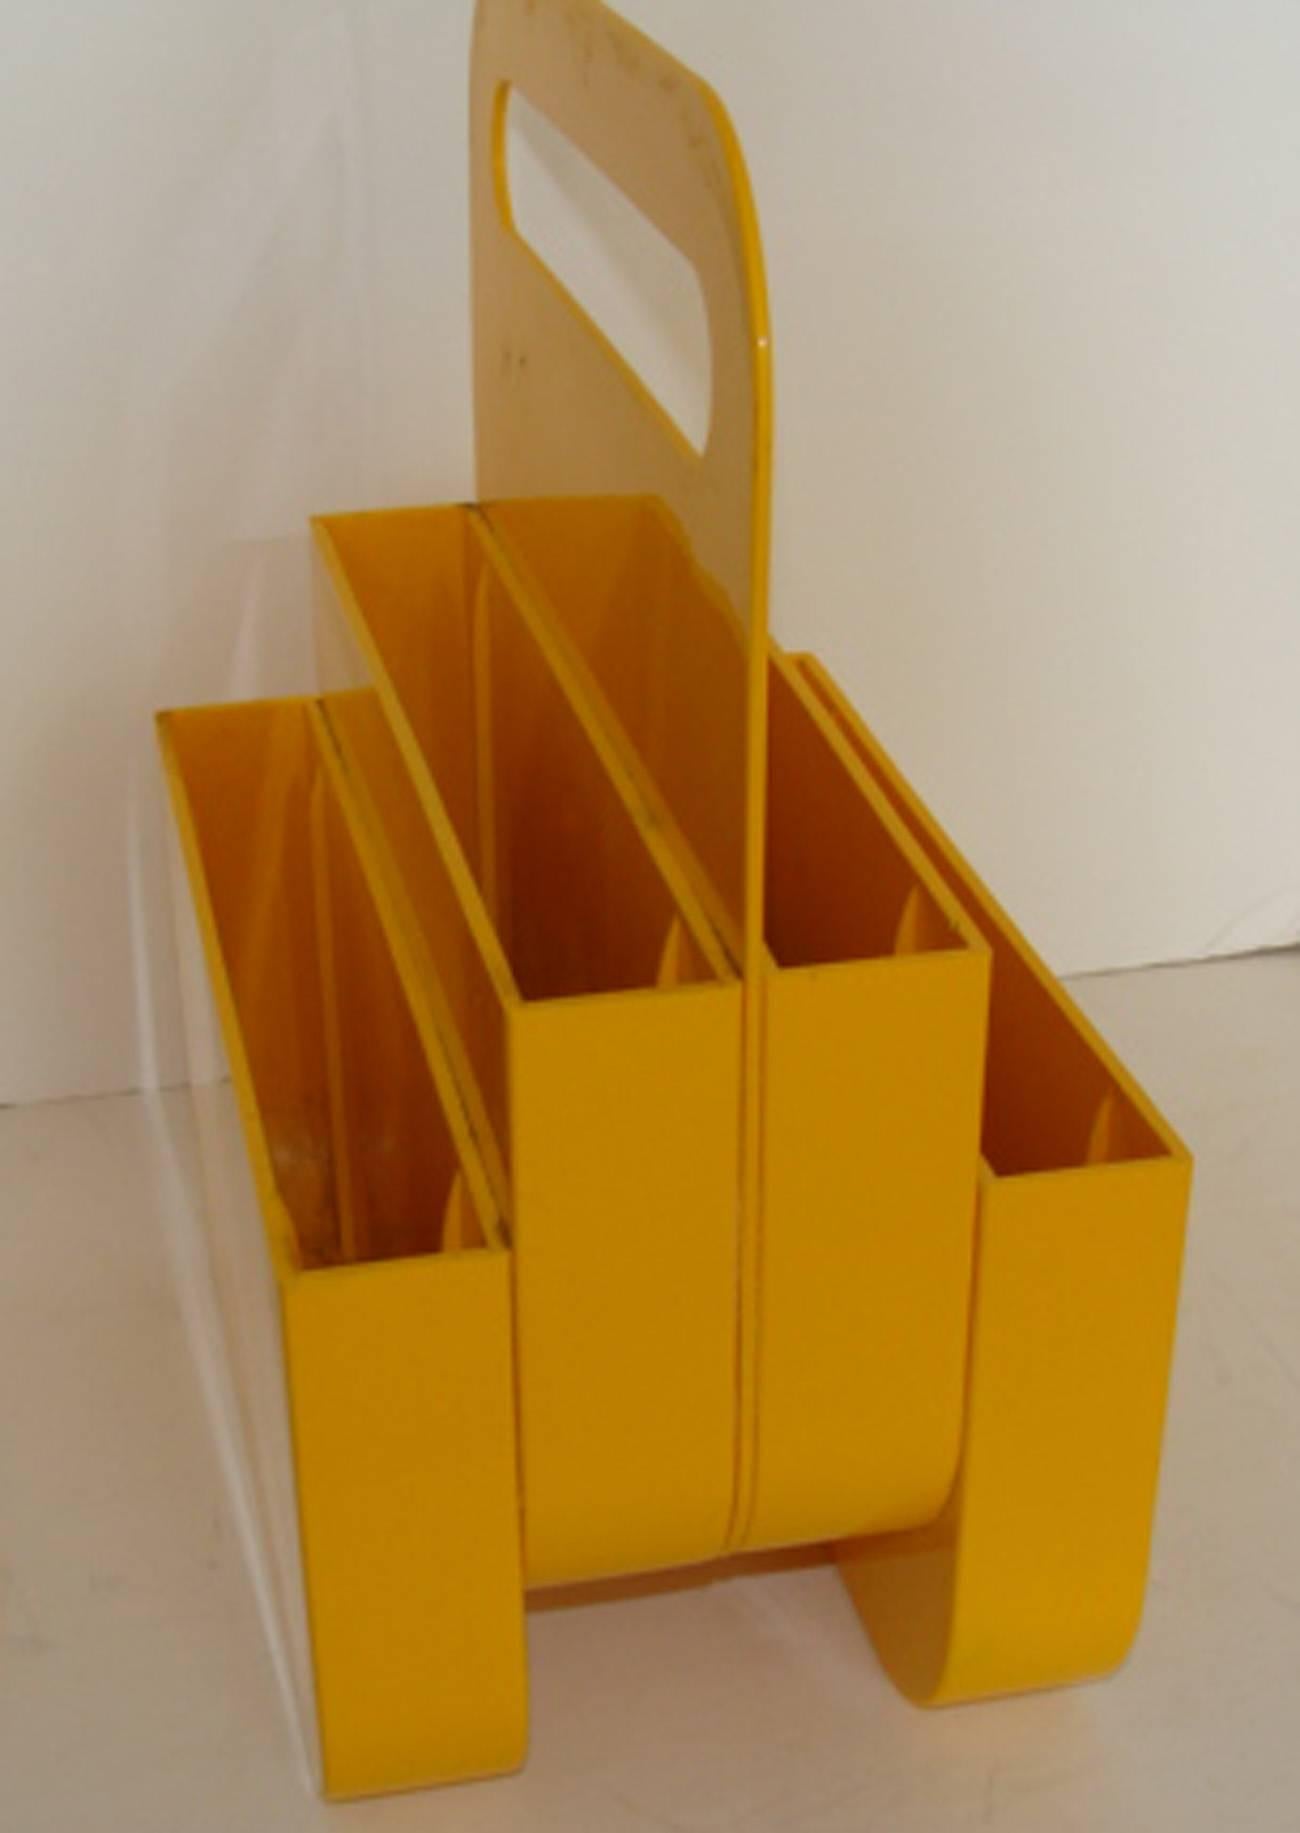 Rarely available, this is a bright yellow ABS plastic magazine holder designed by Olaf von Bohr for Kartell, Italy. No damage or flaws except for a few minor scratches.